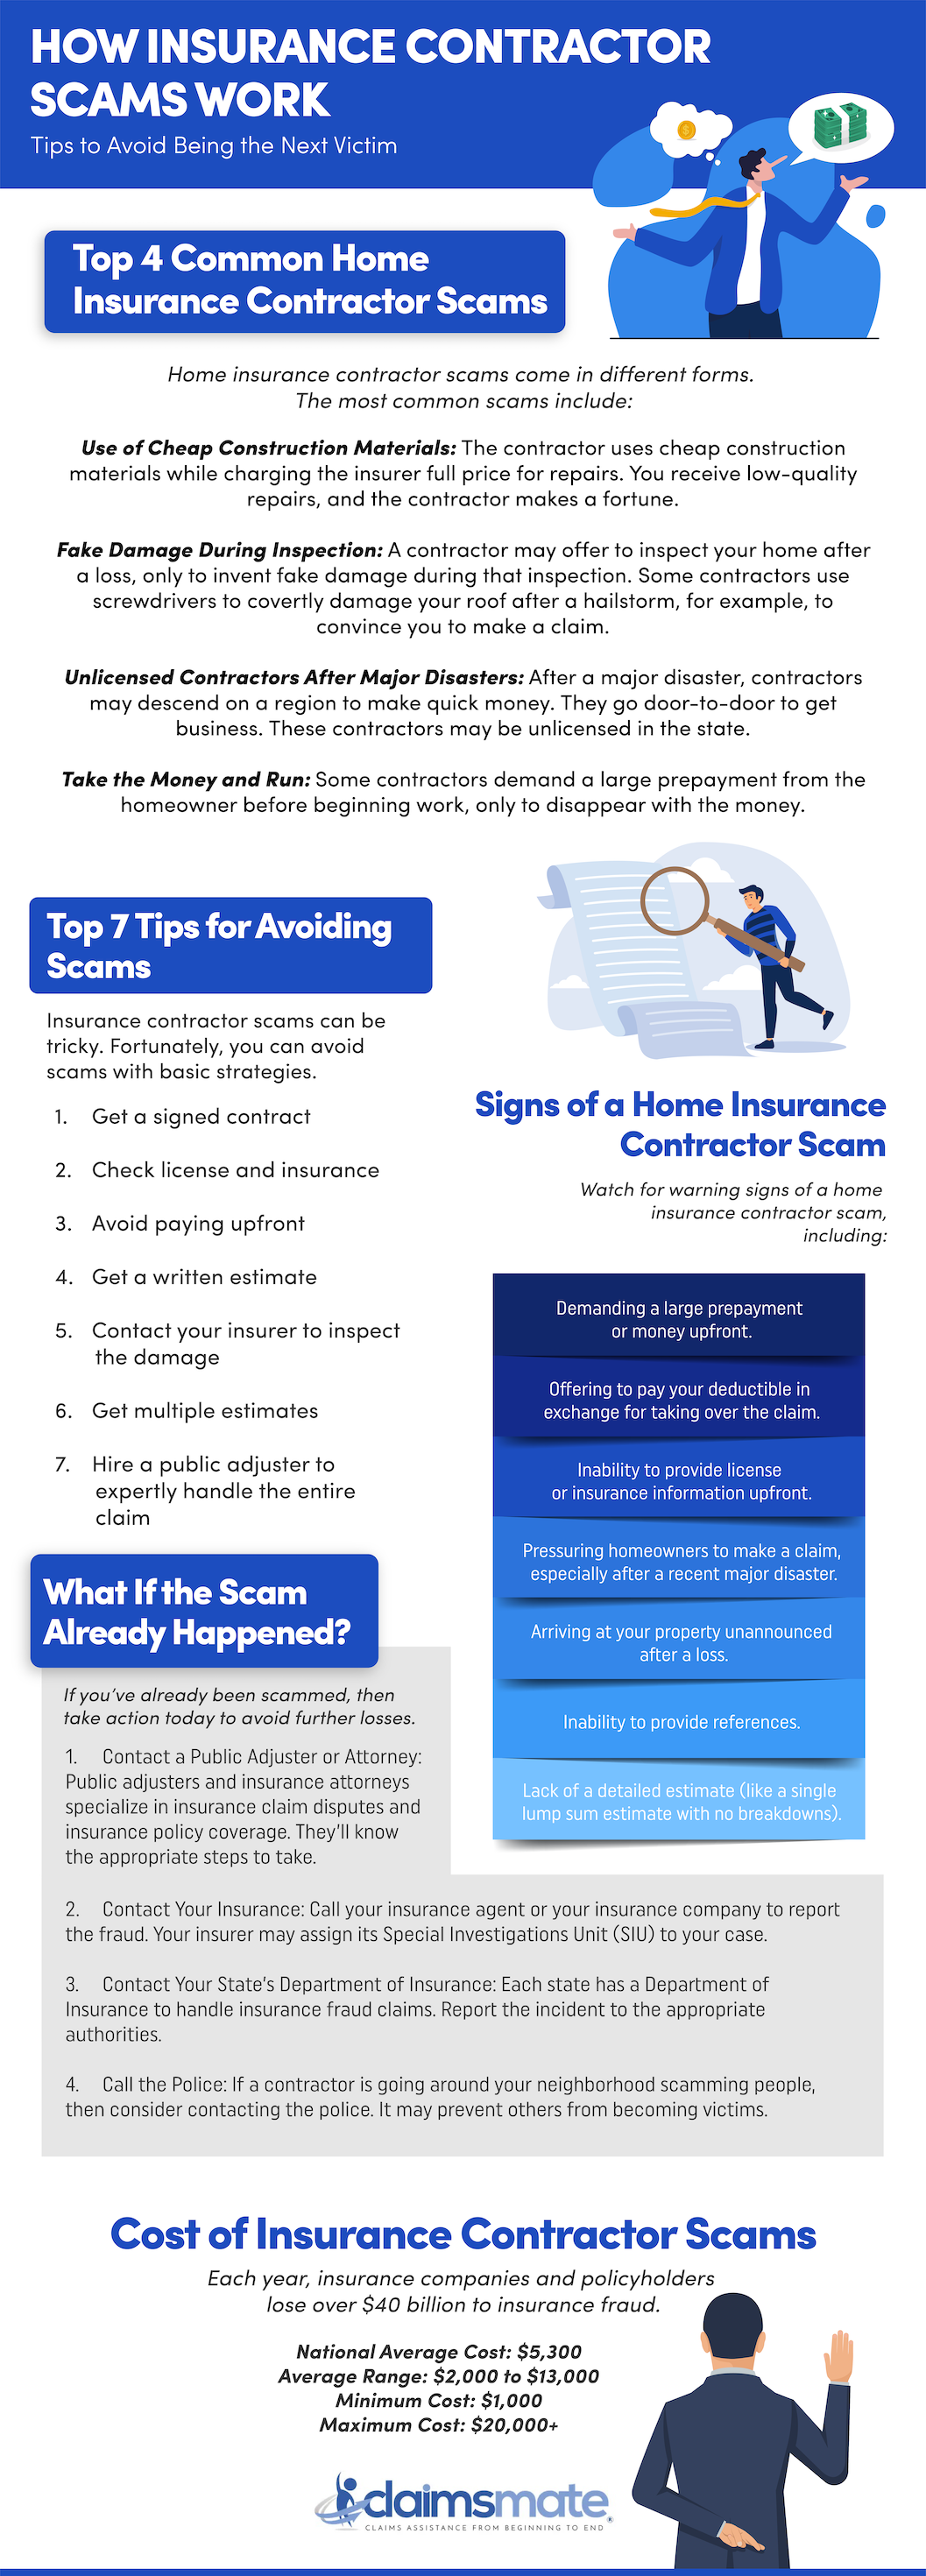 How Insurance Contractor Scams Work